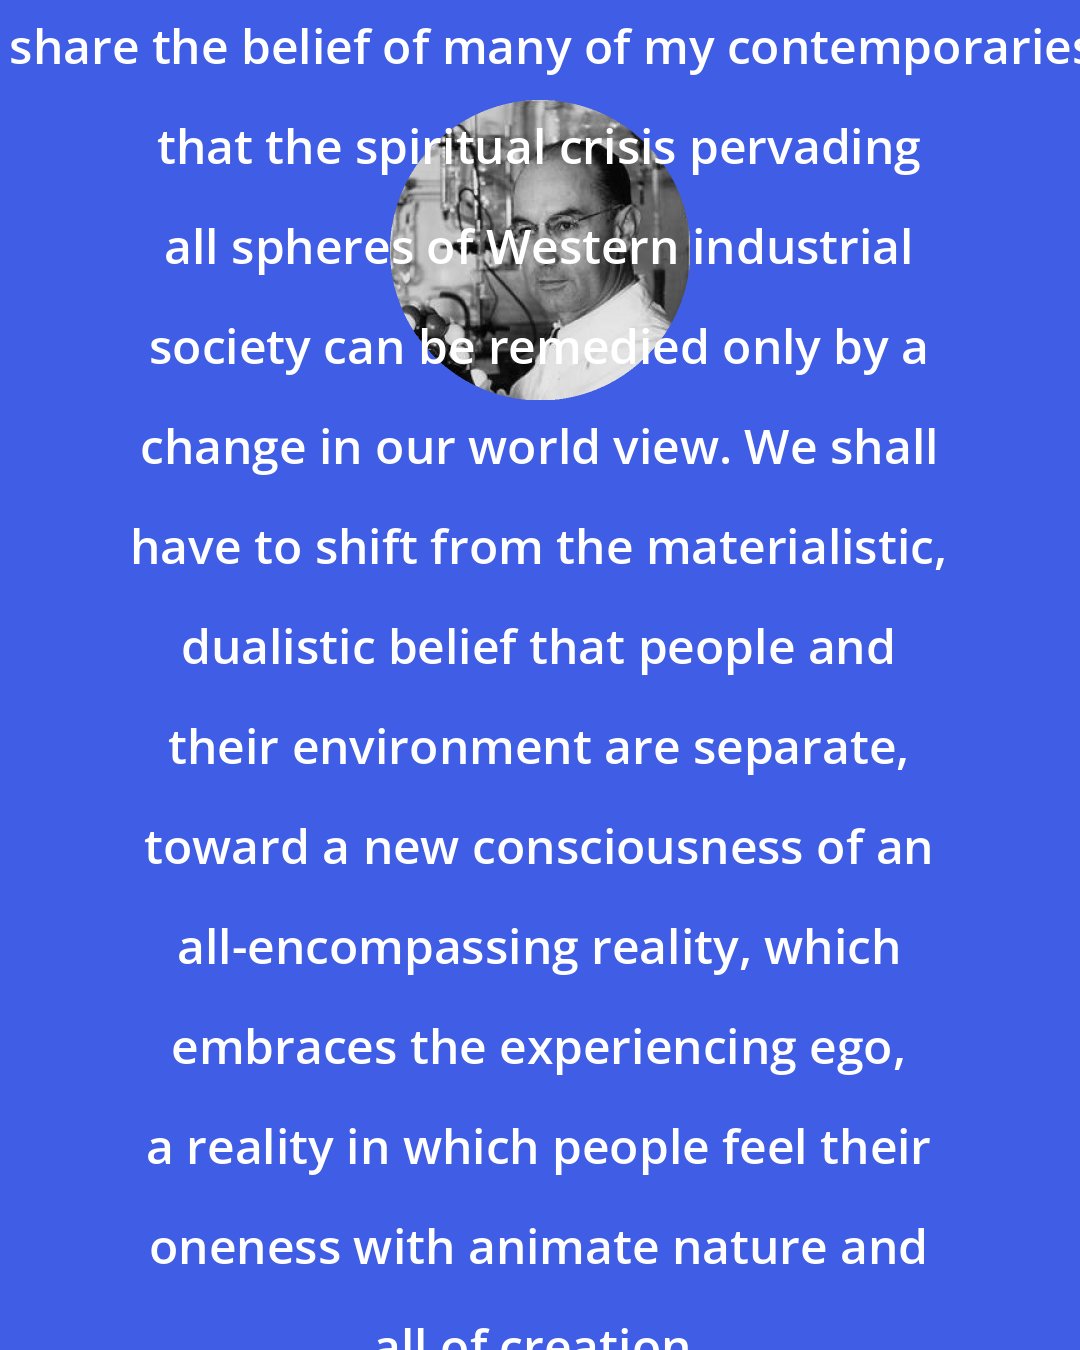 Albert Hofmann: I share the belief of many of my contemporaries that the spiritual crisis pervading all spheres of Western industrial society can be remedied only by a change in our world view. We shall have to shift from the materialistic, dualistic belief that people and their environment are separate, toward a new consciousness of an all-encompassing reality, which embraces the experiencing ego, a reality in which people feel their oneness with animate nature and all of creation.